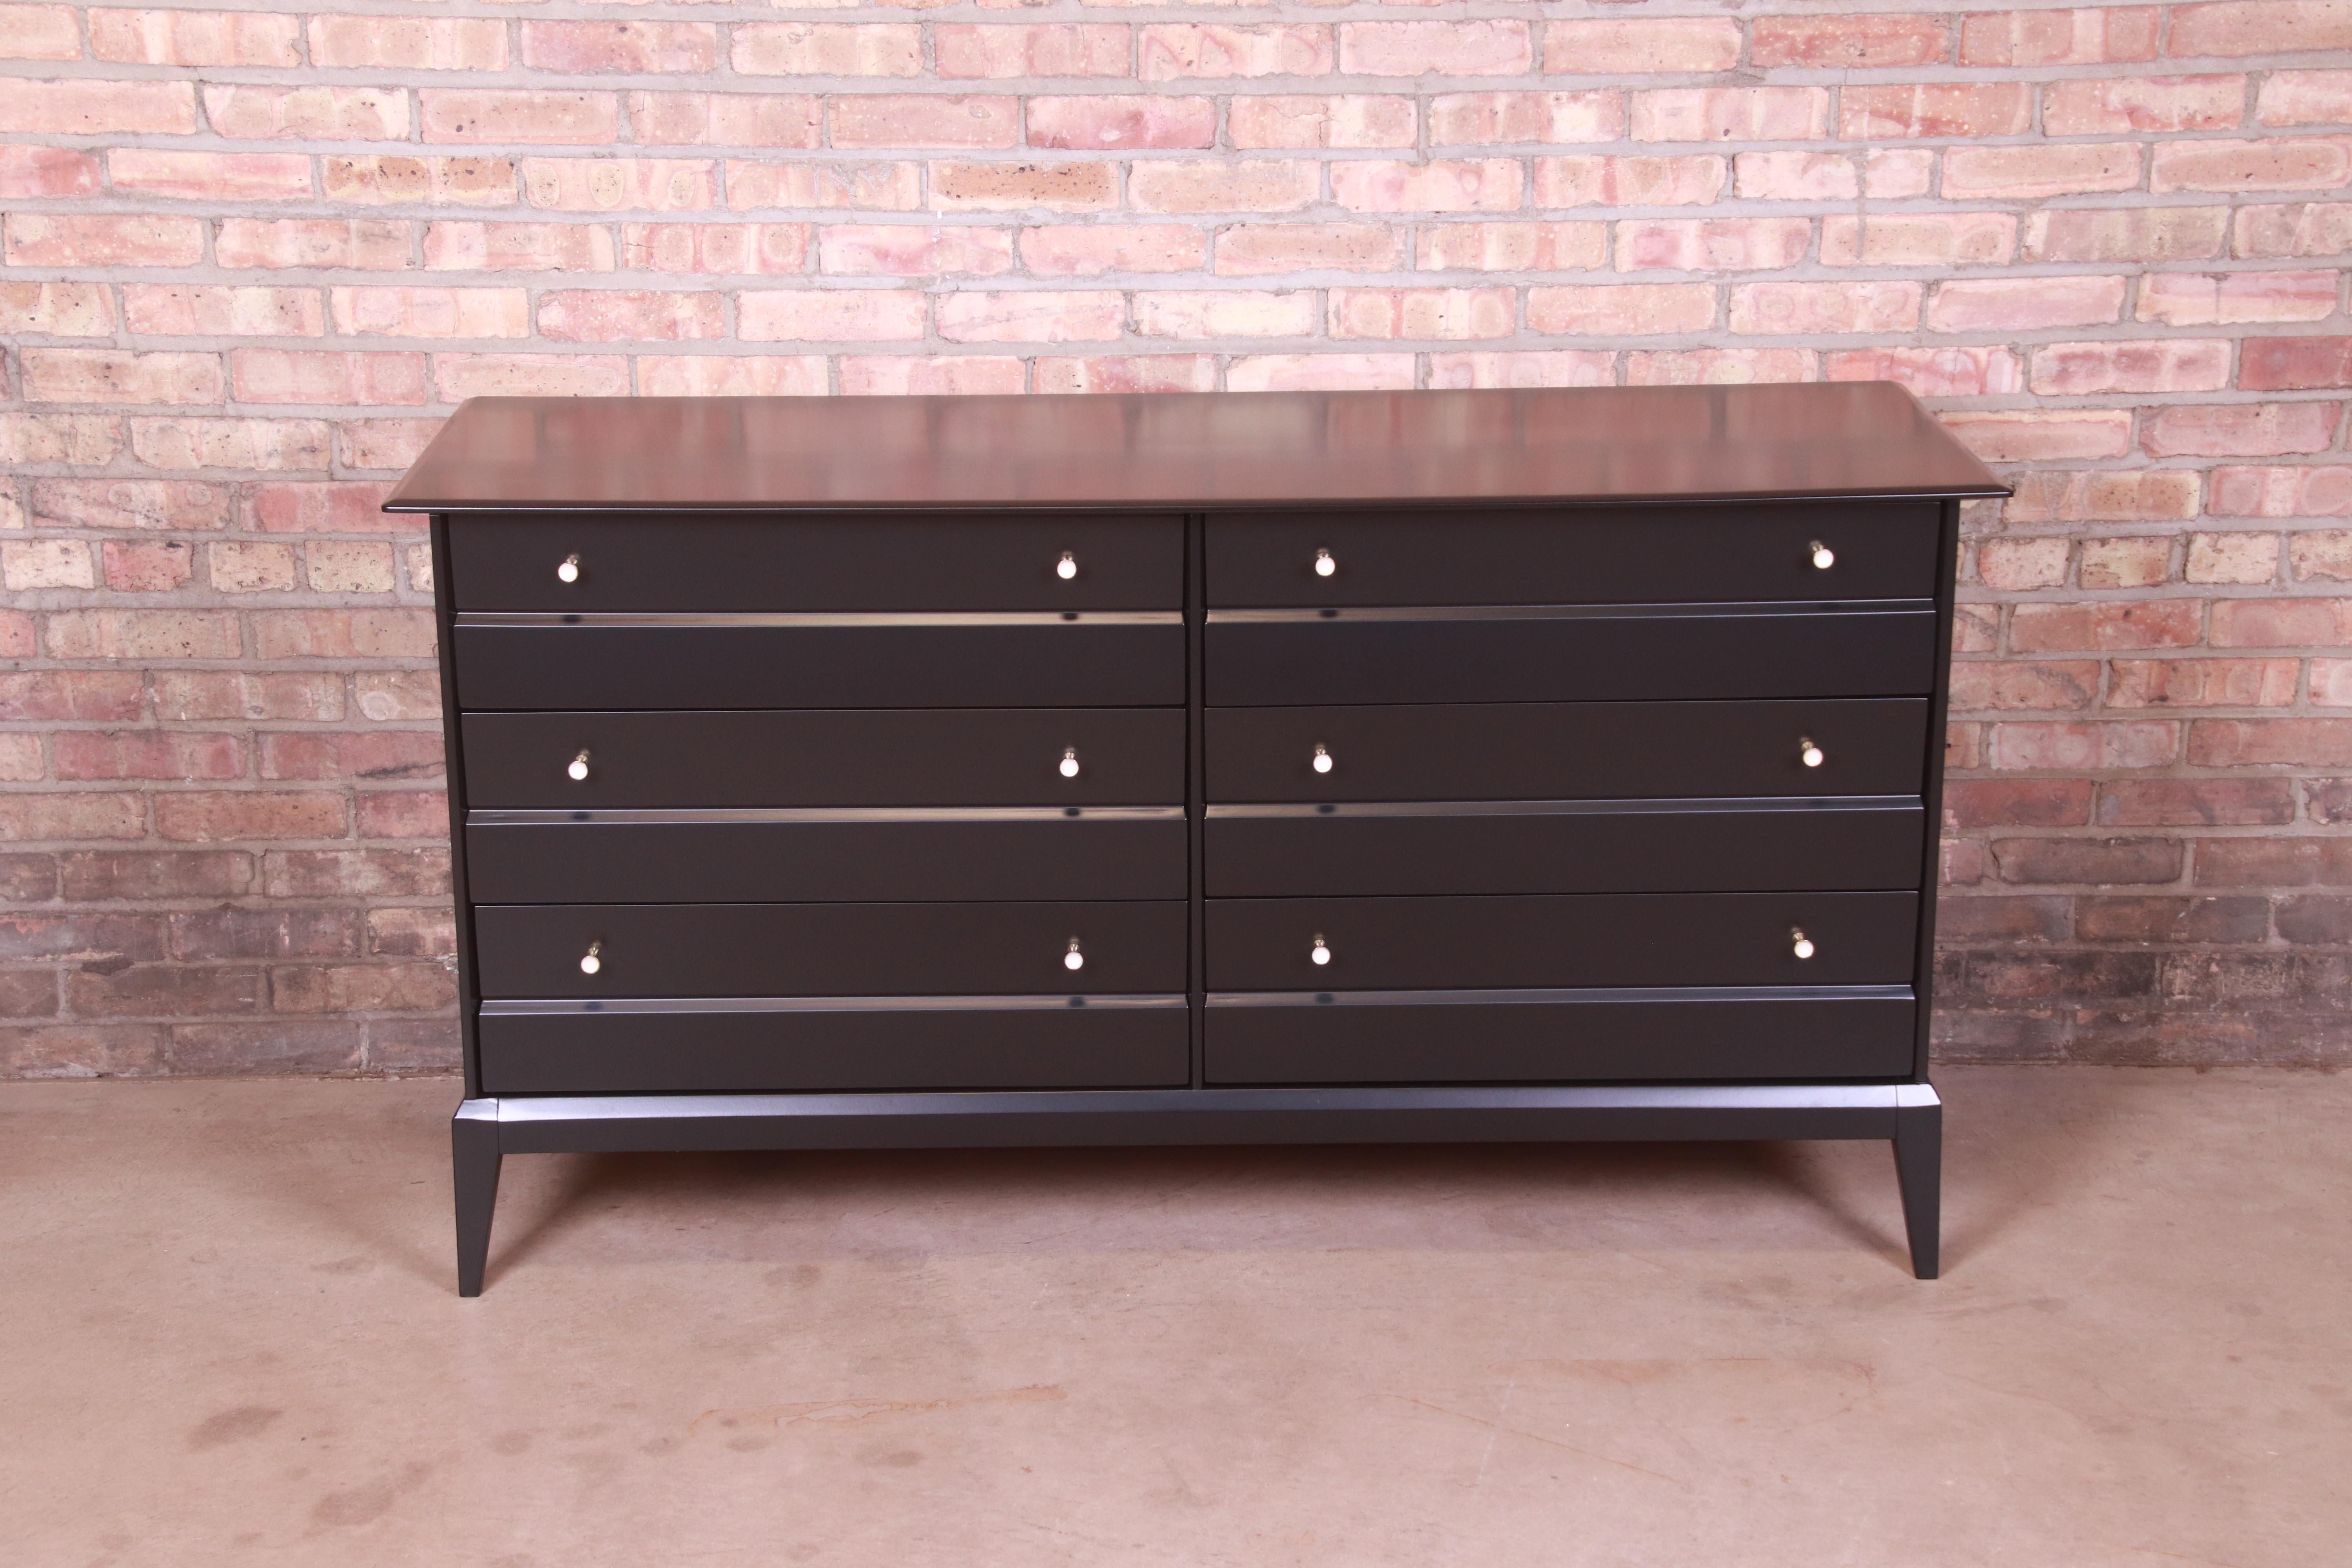 A sleek and stylish black lacquered mid-century modern dresser or credenza

In the style of Paul McCobb's iconic 